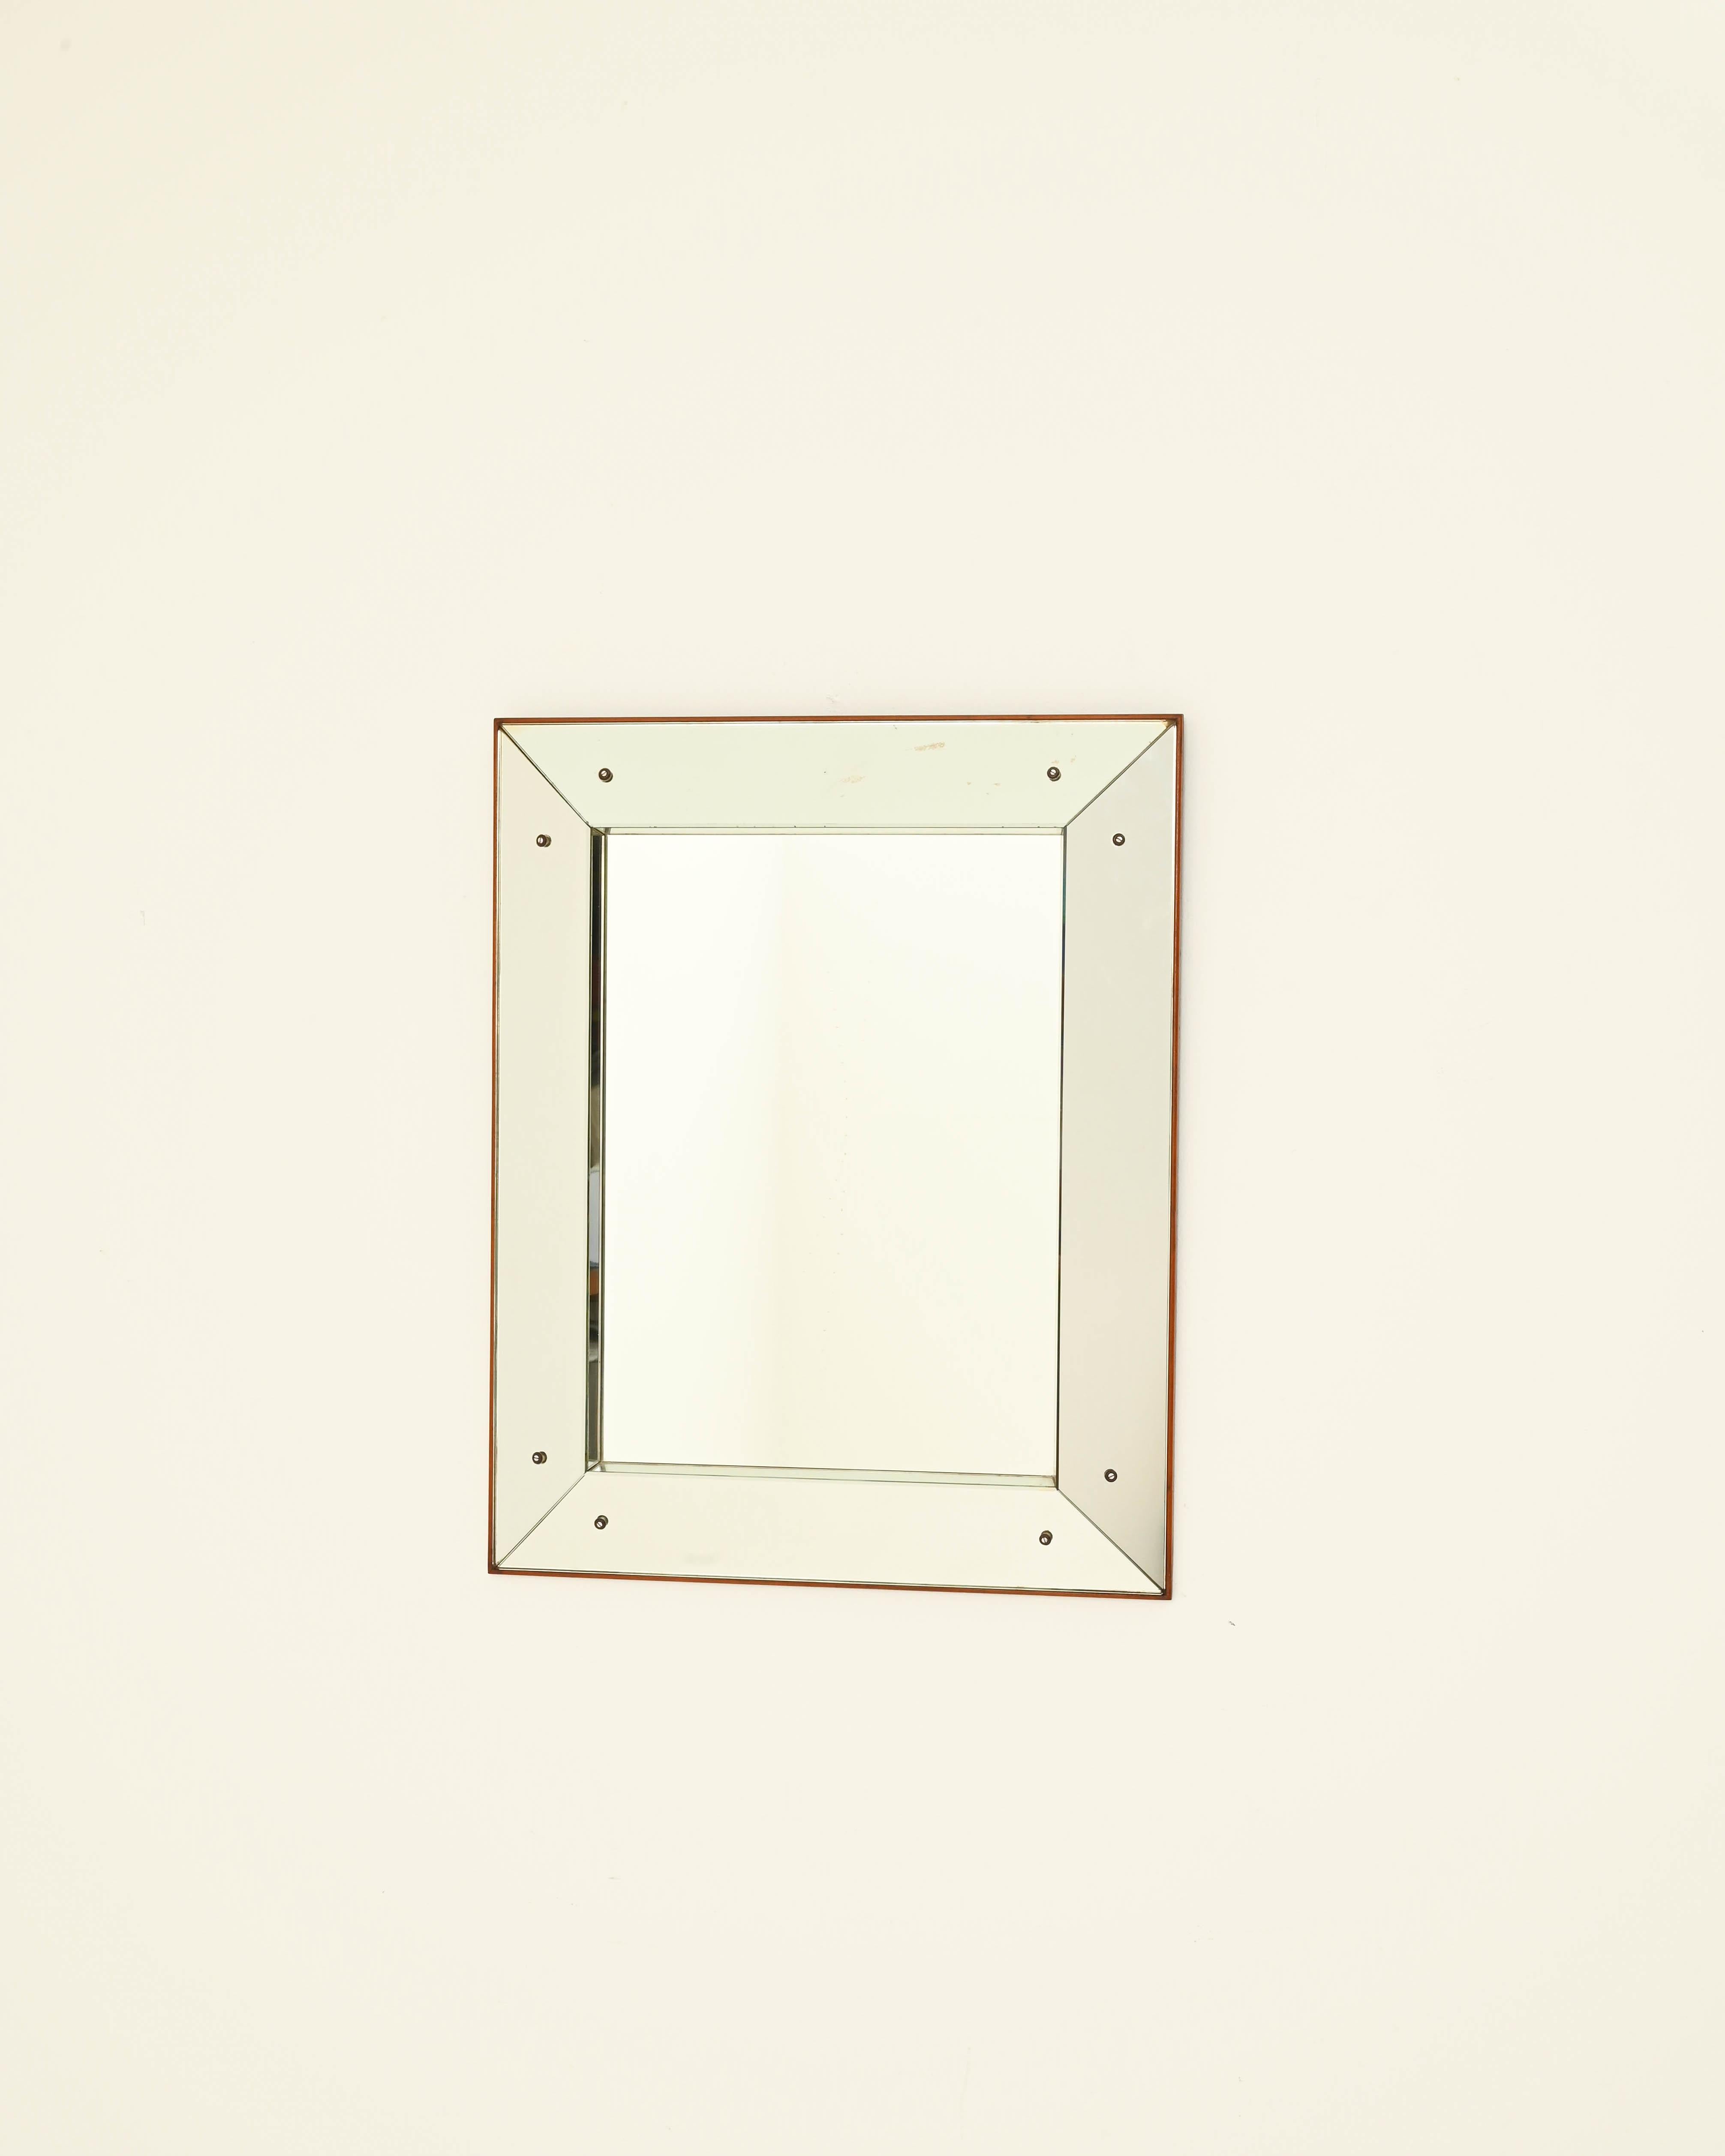 A keenly stylish design gives this vintage mirror a timeless glamour. Made in Italy in the 20th century, the bold minimalism and sleek unity of the composition showcase the sophistication of the ‘Bel Design’ movement. The rectangular mirror is